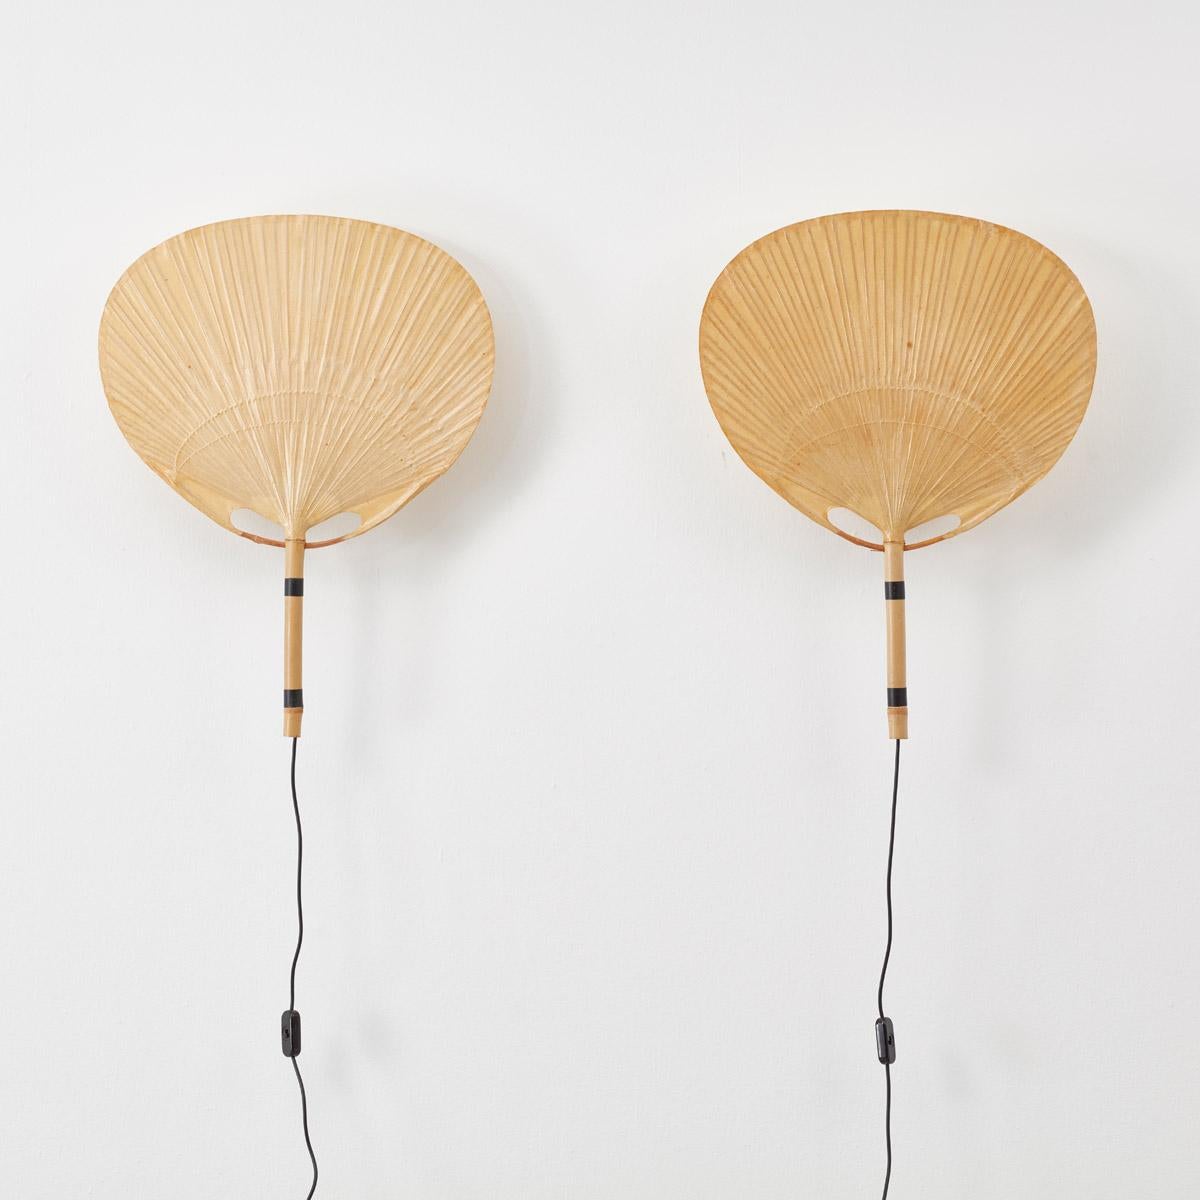 Ingo Maurer’s company Design M is based in Munich and has been designing intriguing lighting for over 40 years. His aesthetic is eccentric and set apart from his contemporaries. These delicate Uchiwa fan wall lights were made from bamboo, Maurer